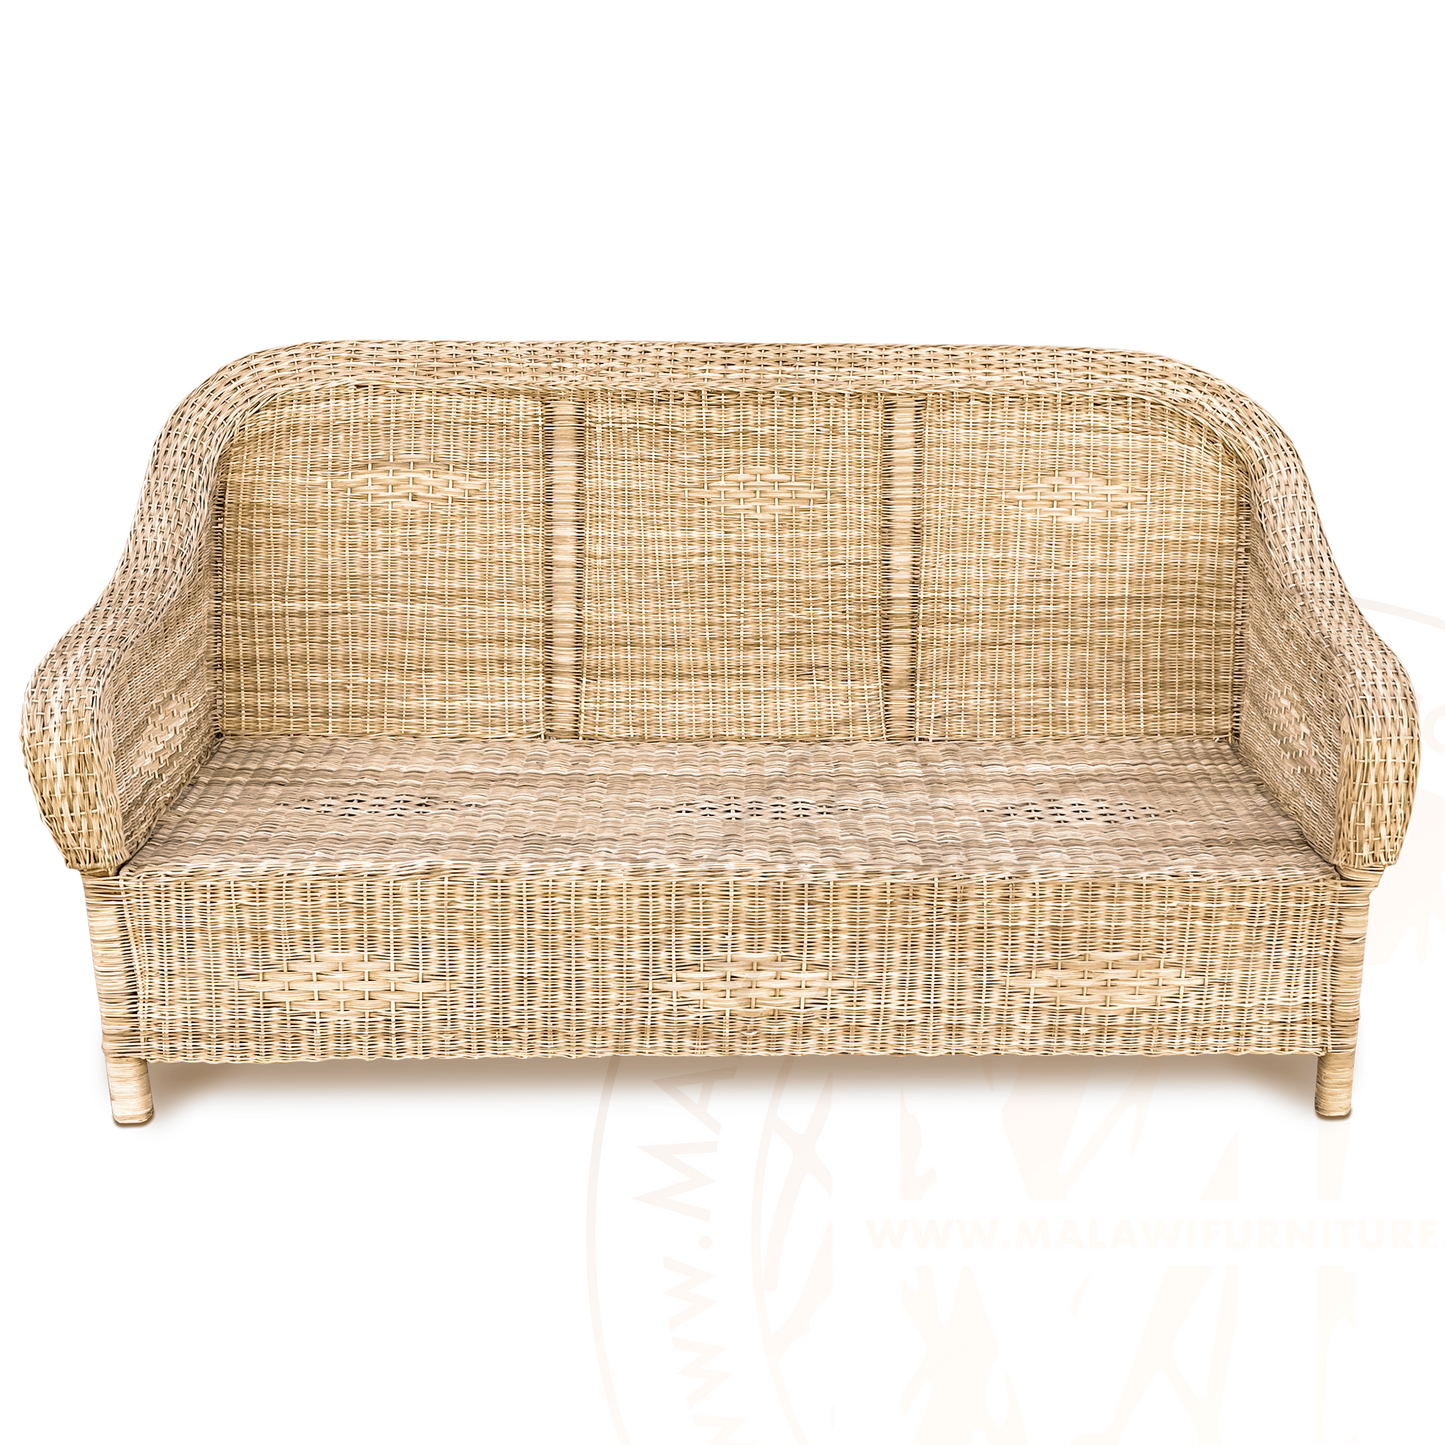 Classic Malawi Couch Set (3,2,1 Seater & Grass Mat)